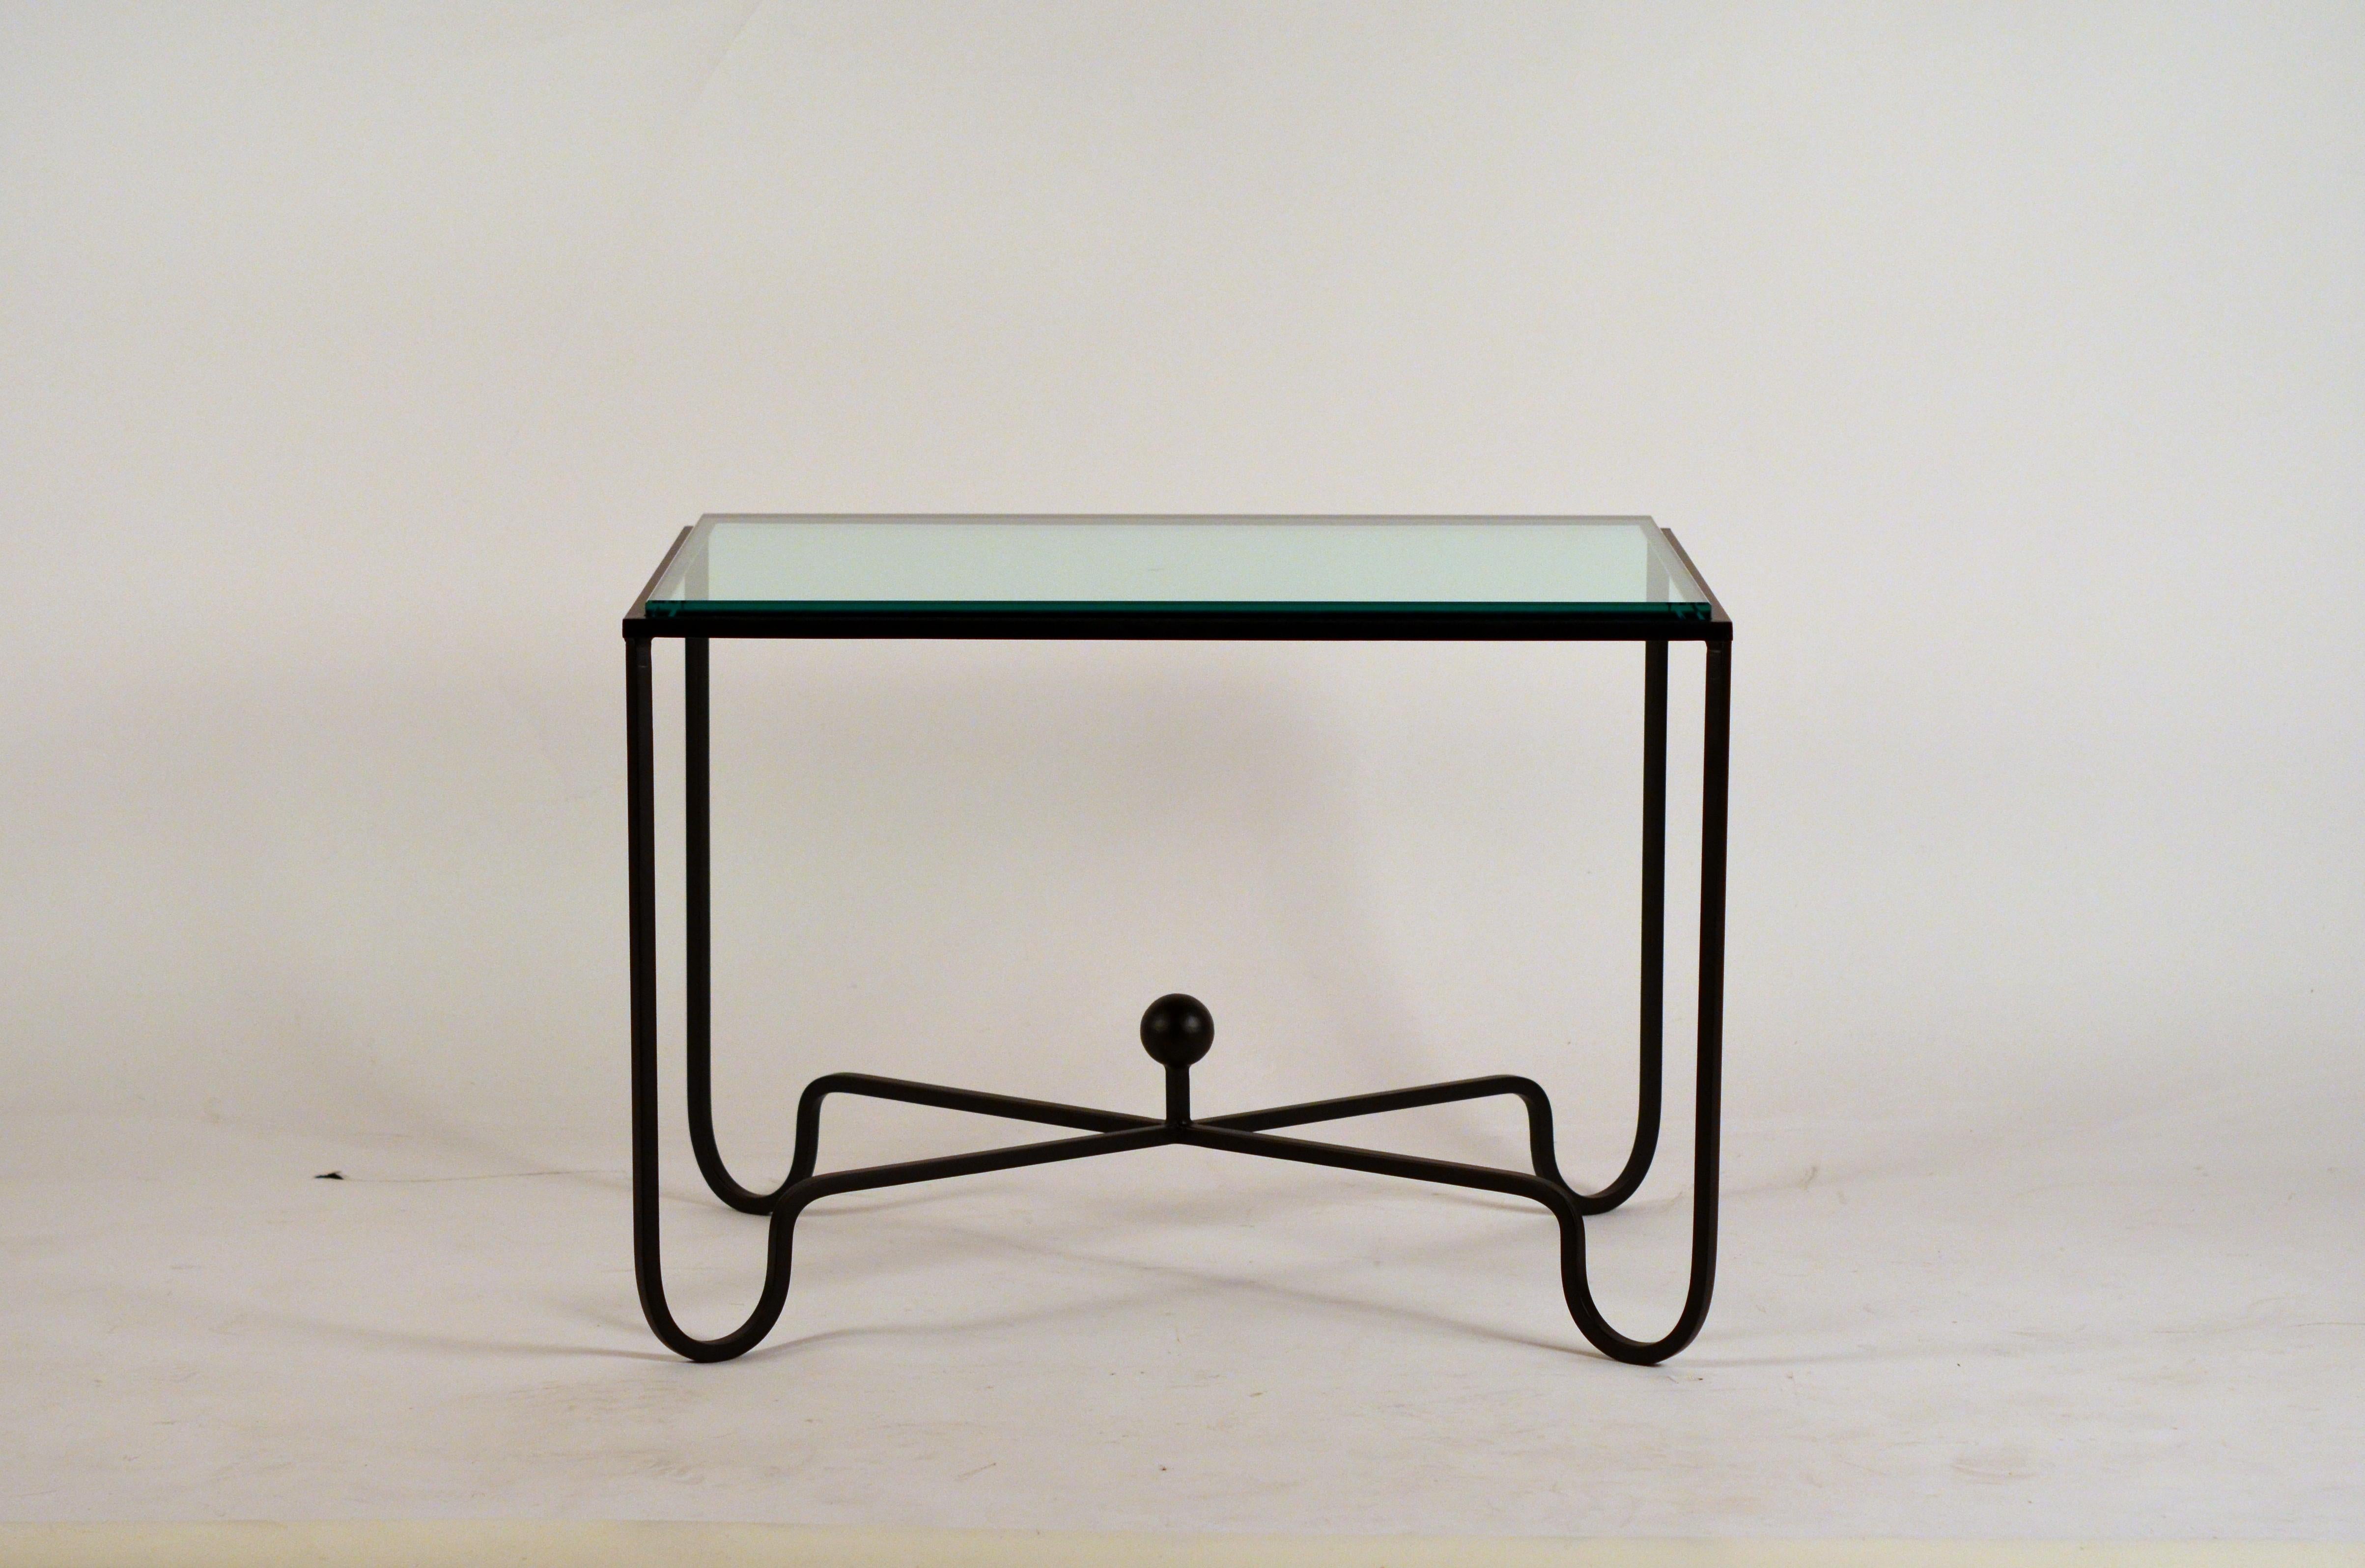 Chic Blackened Steel and Glass 'Entretoise' Side Table by Design Frères For Sale 2